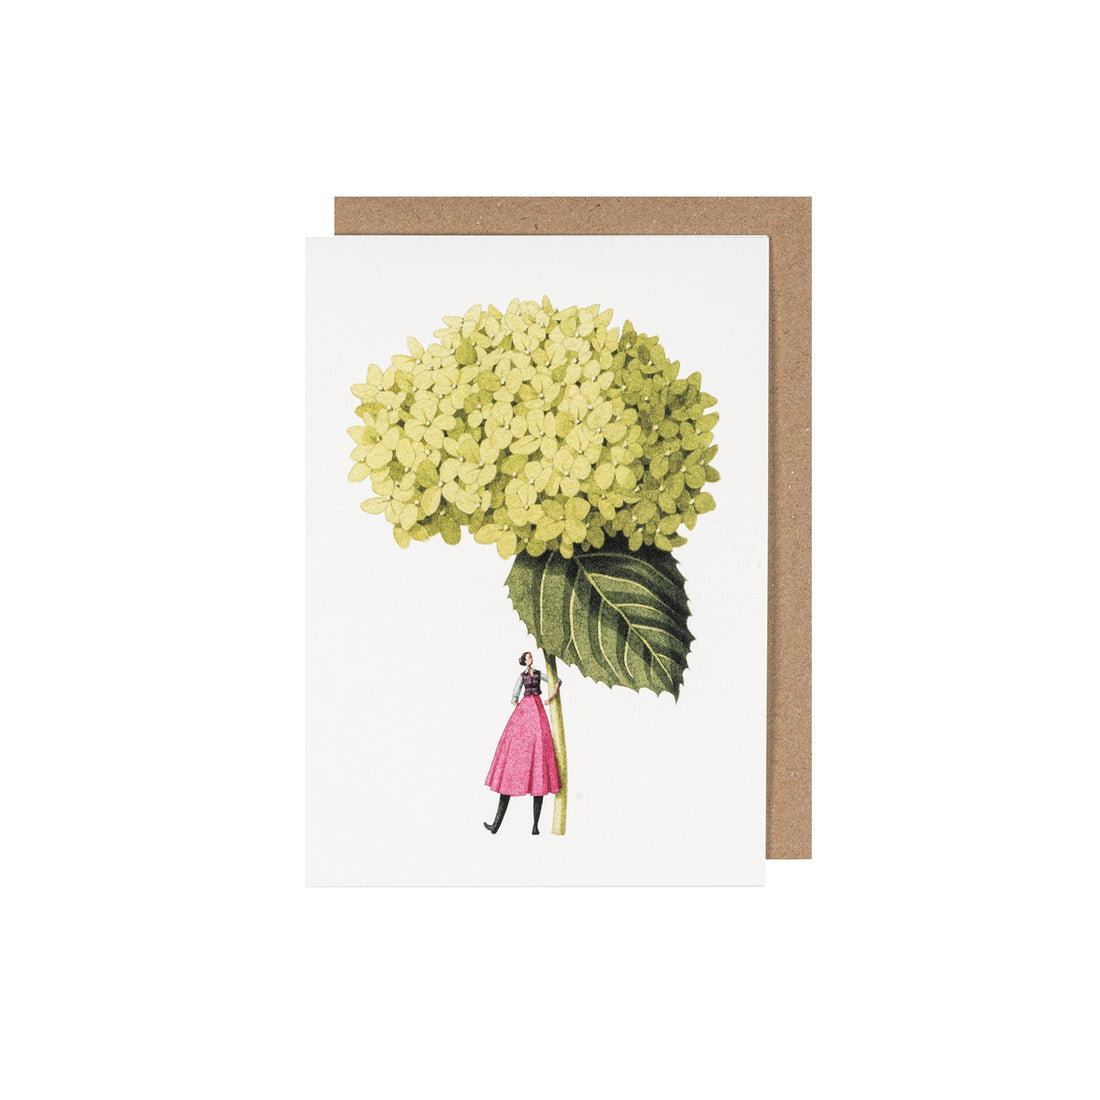 Annabelle greeting card with an illustration by Laura Stoddart of a woman holding a large green hydrangea bloom as an umbrella on environmentally sustainable paper.